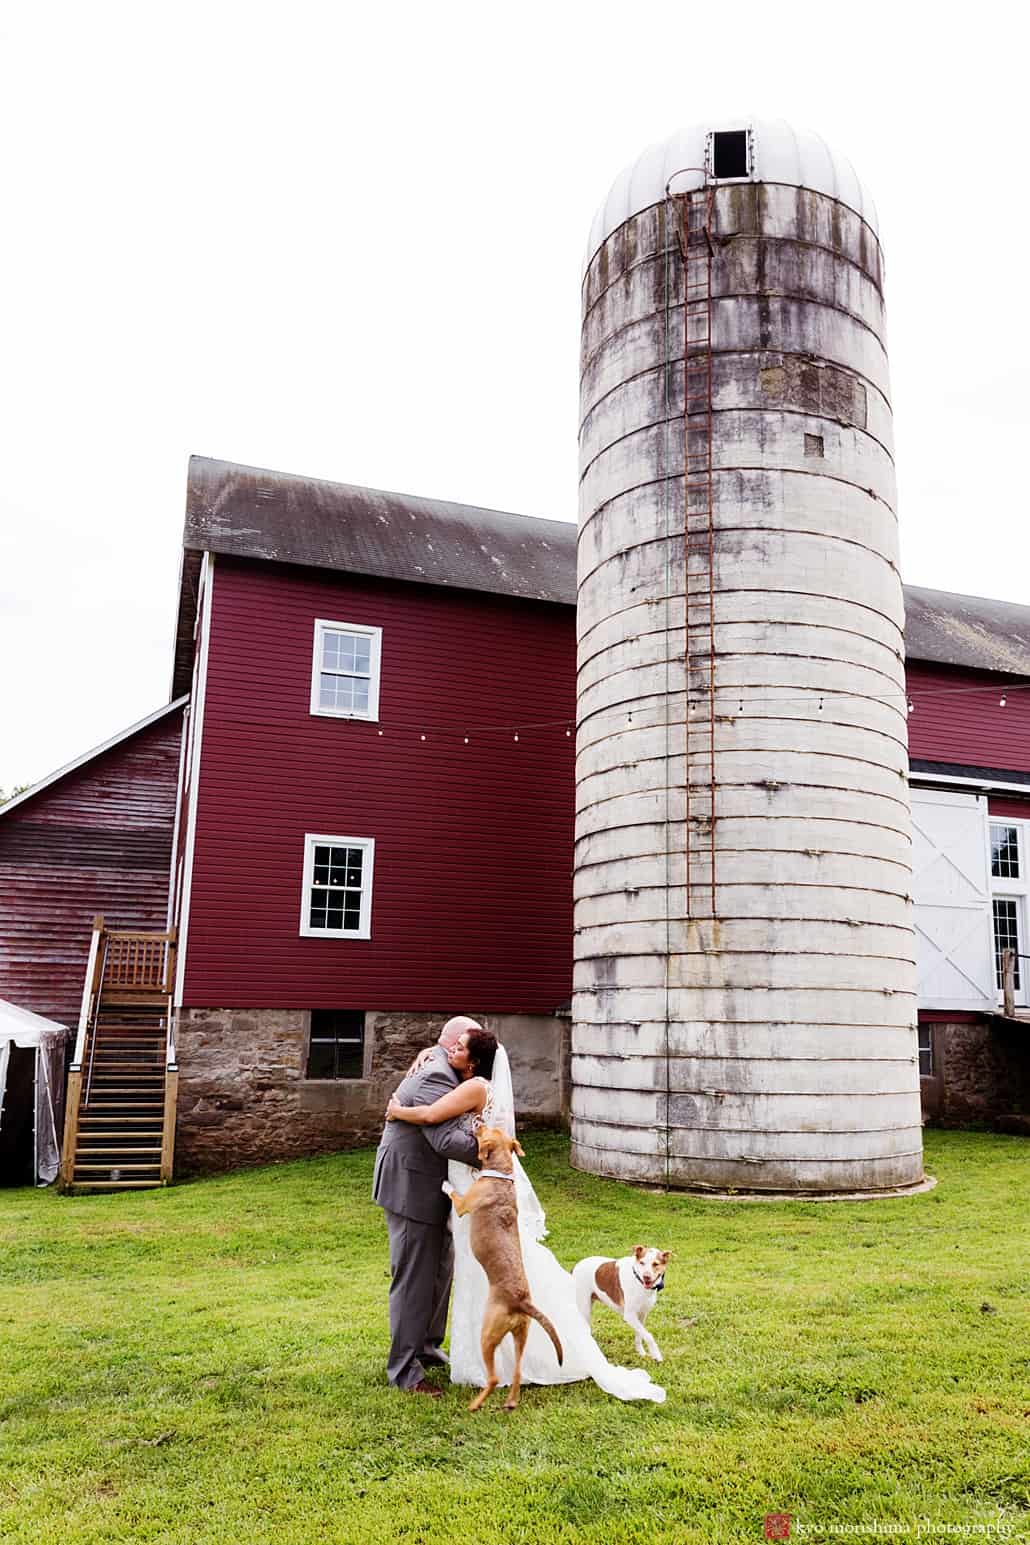 Wedding portrait at one of the best NJ barn wedding venues, Glenmoore Farm in Hopewell Princeton (mercer county) Glenmoore Farm, Emily’s Pennington, Adam Oded, A-1 Limo, Mary Bradley Events, Grevillea Weddings and Events, Kyo Morishima Photography, Princeton NJ dogs portrait